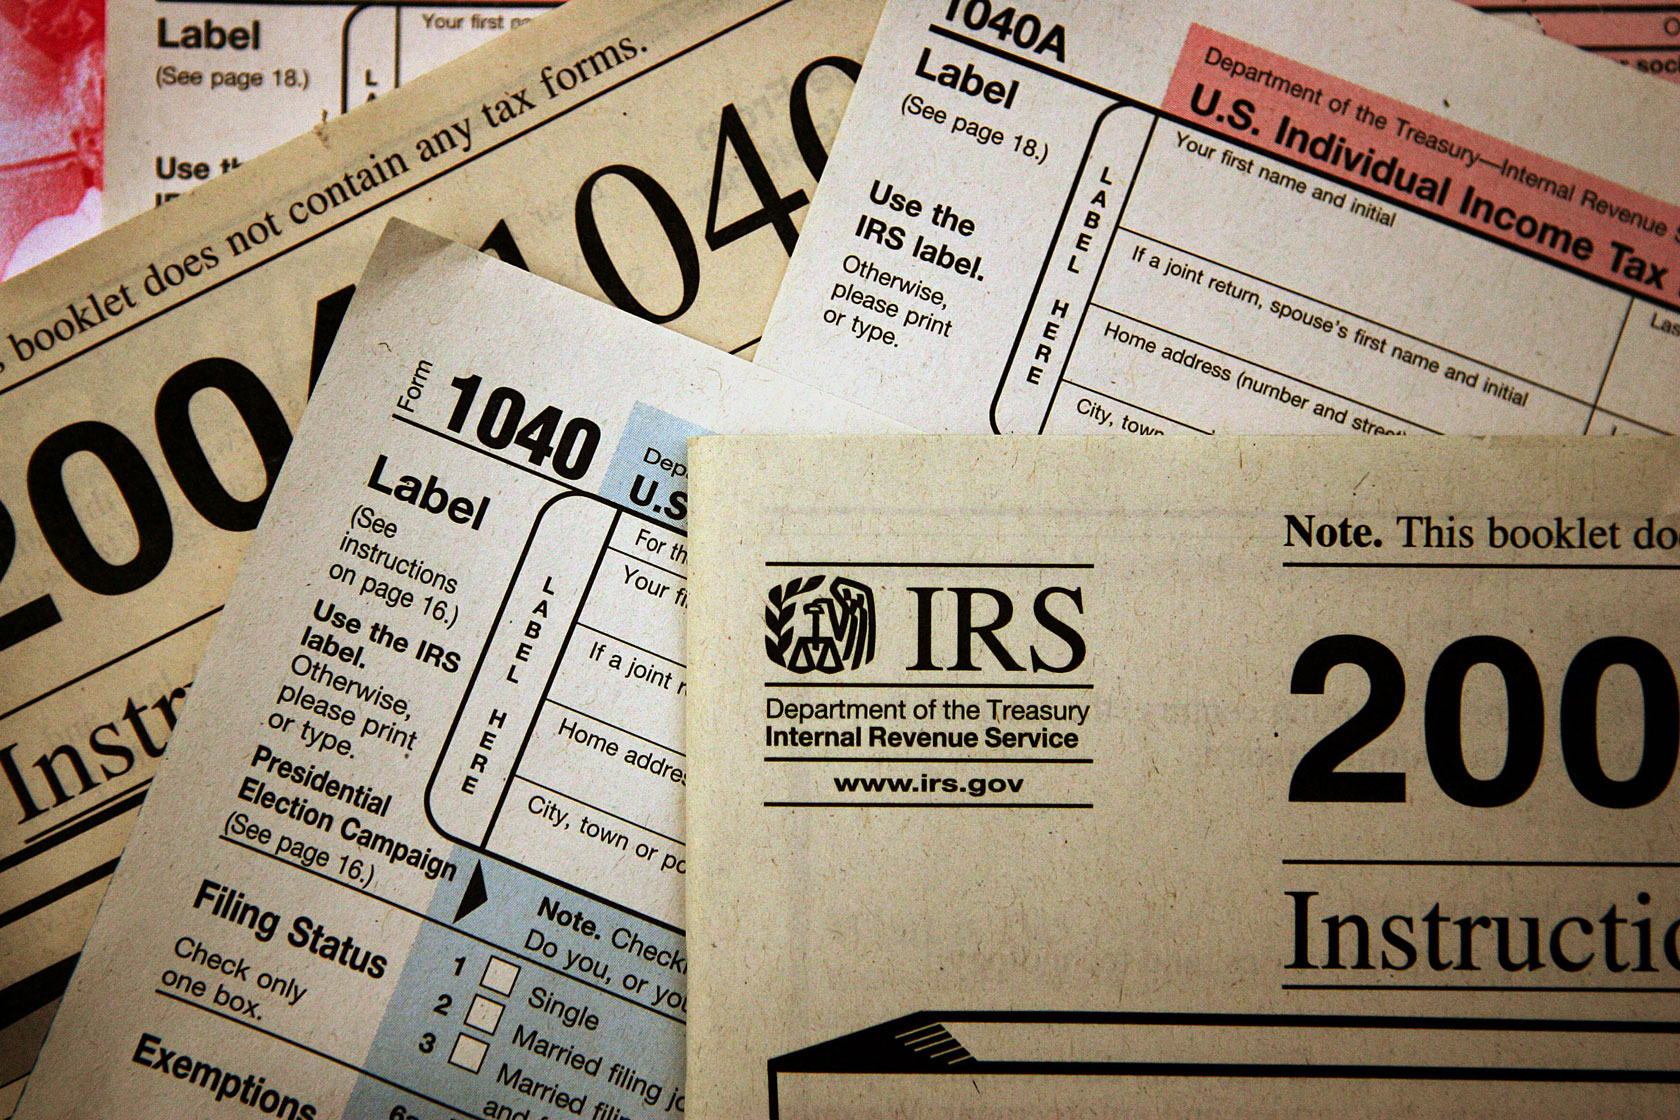 Tax Season Made Simple: Filing Your Federal Income Tax